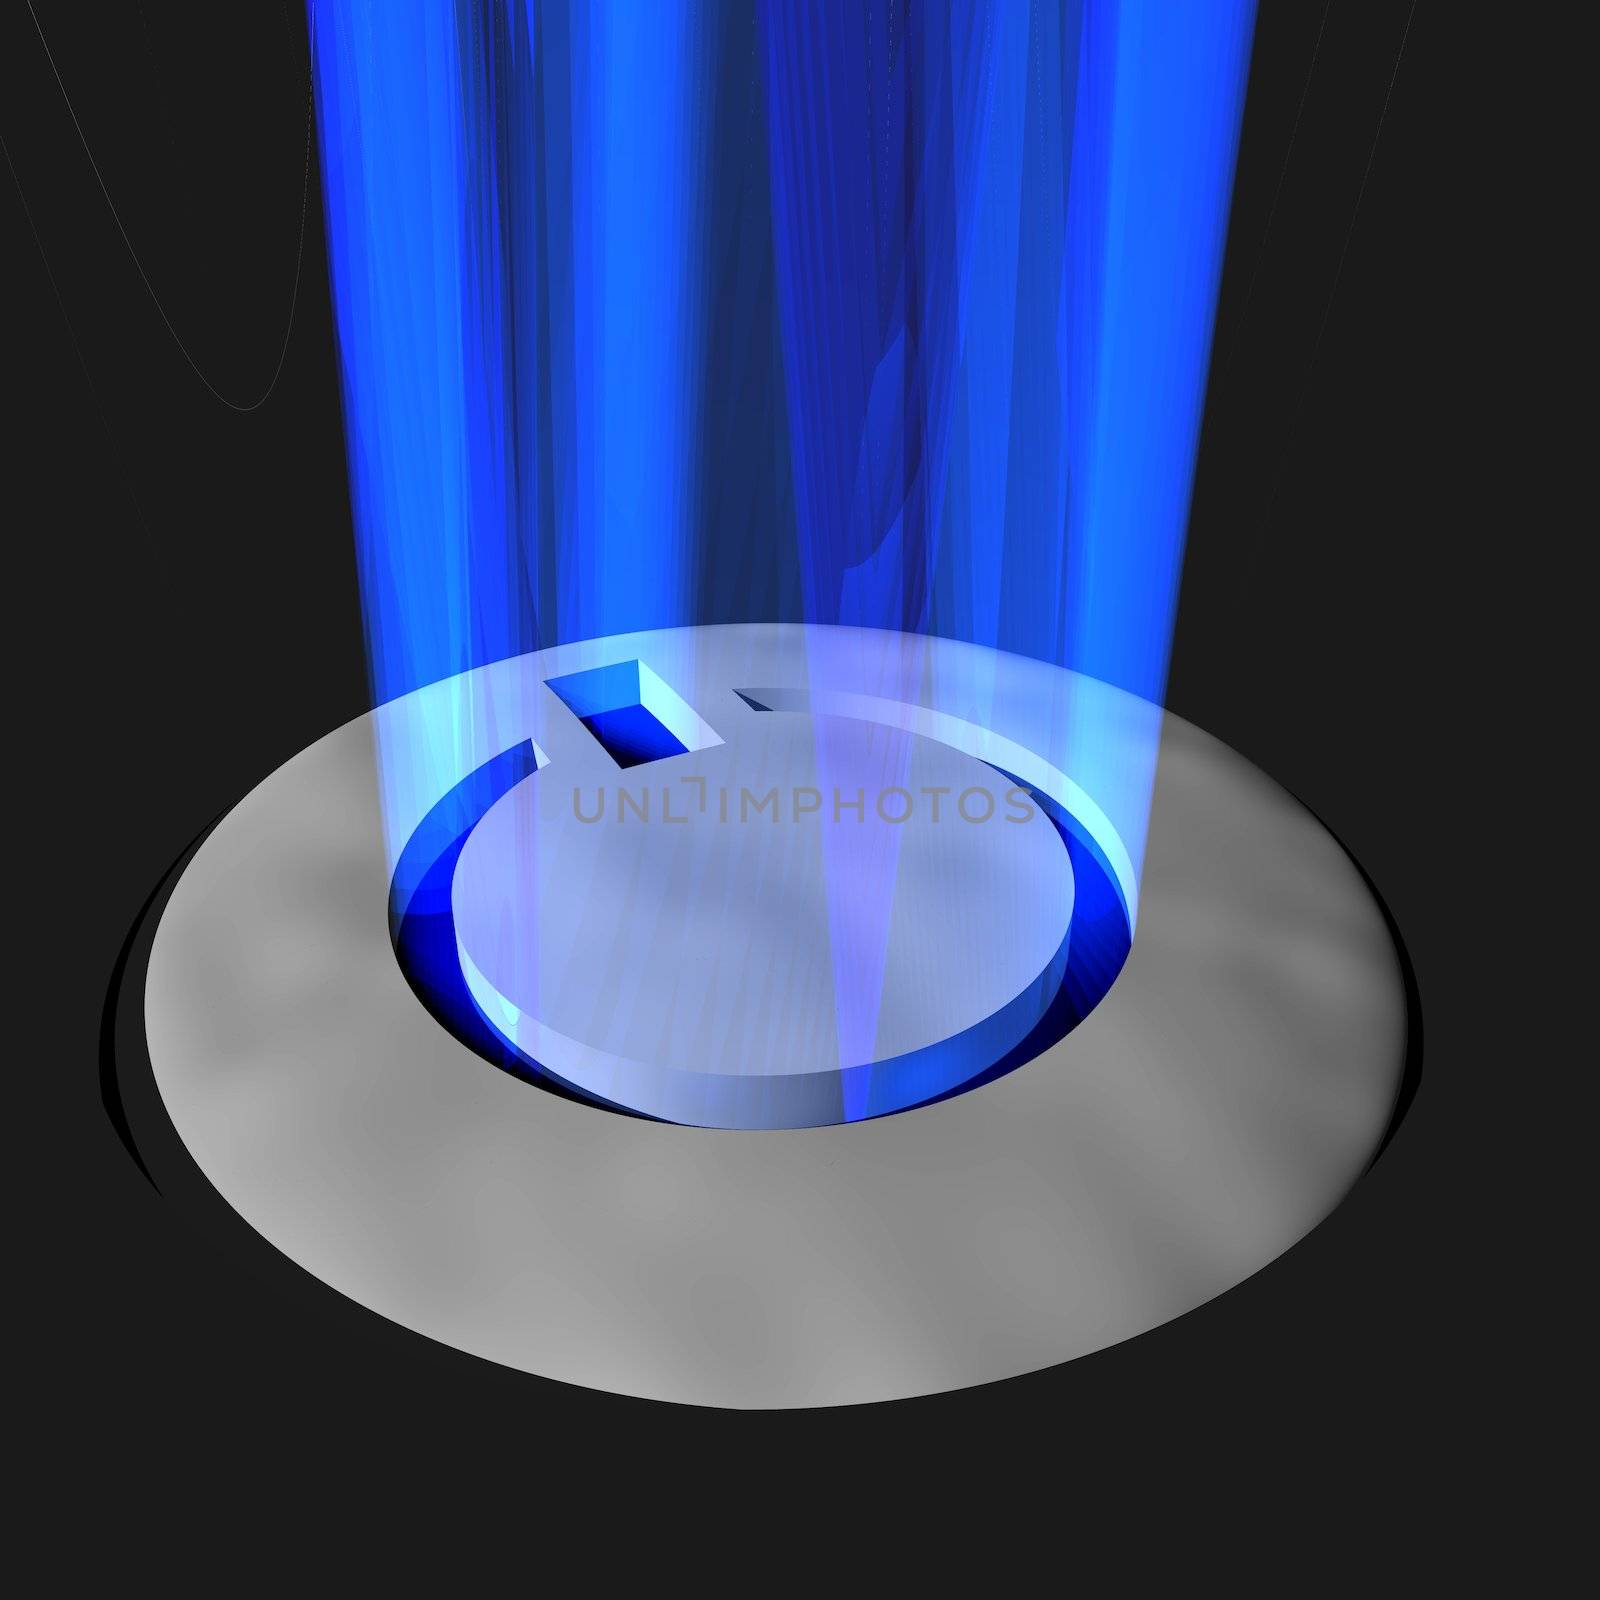 An electronic device�s power button glowing blue.